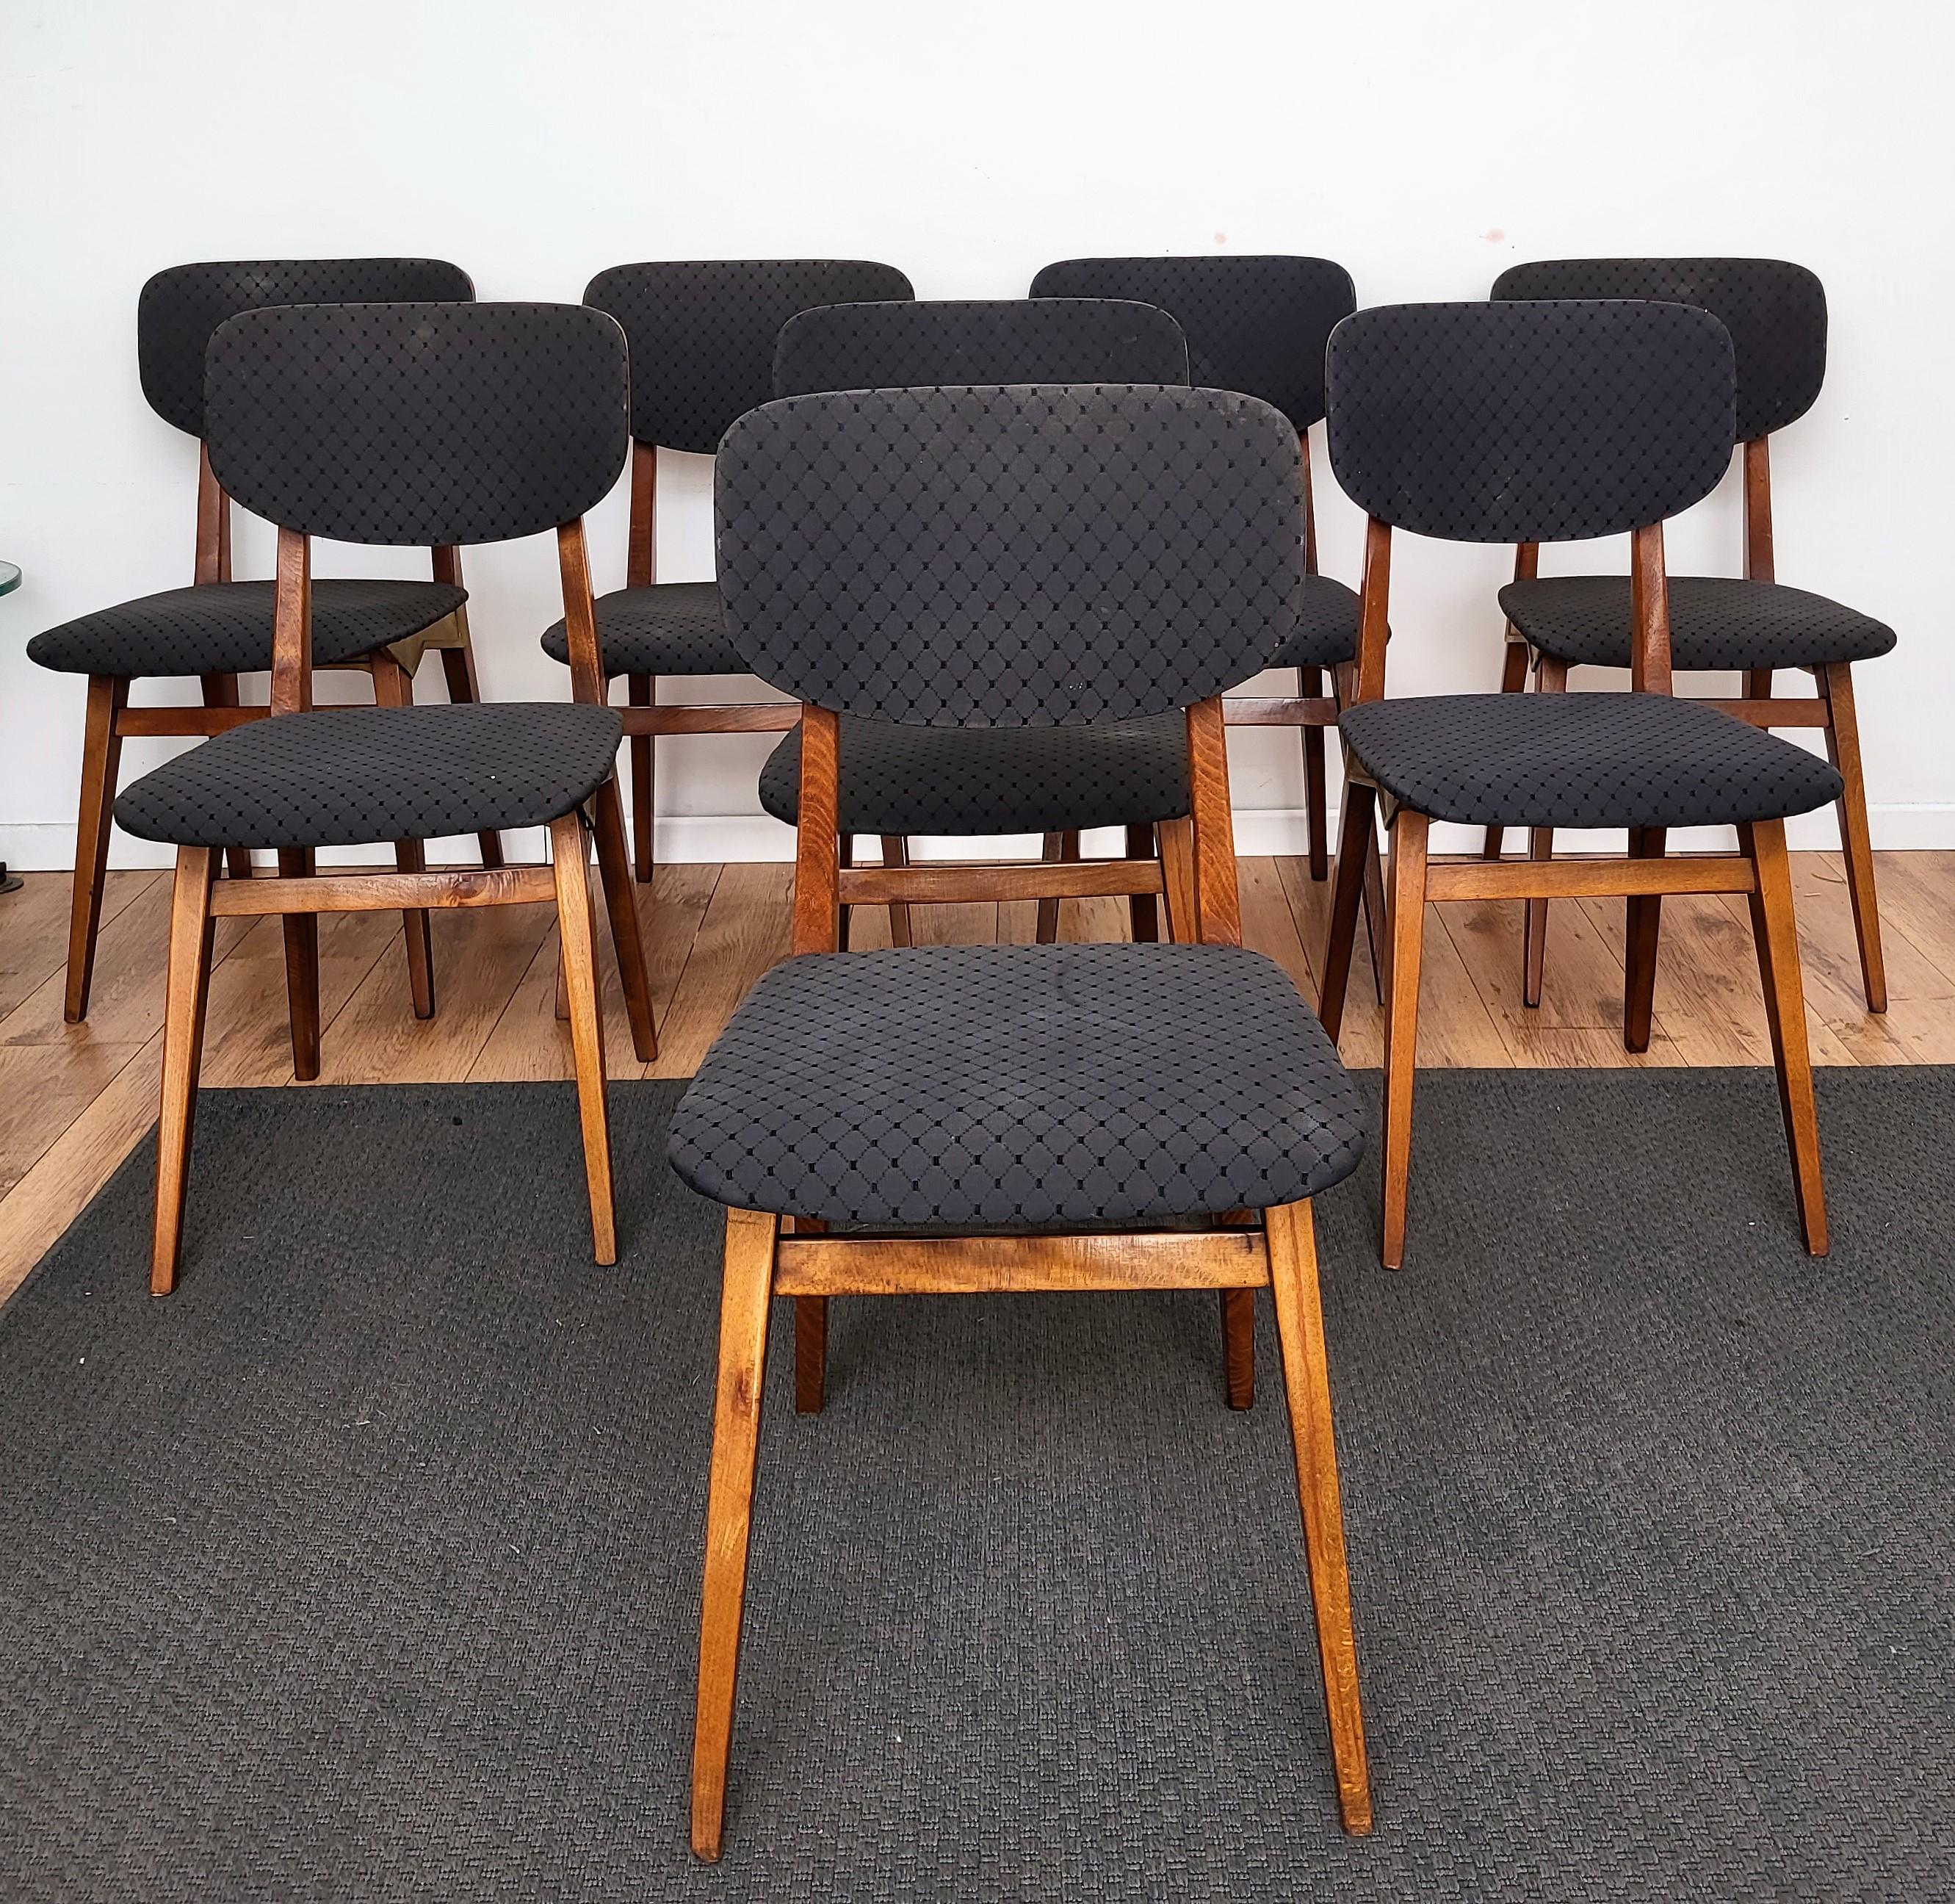 Set of 8 Mid-Century Modern Italian Walnut Wood Brass Upholstered Dining Chairs For Sale 4